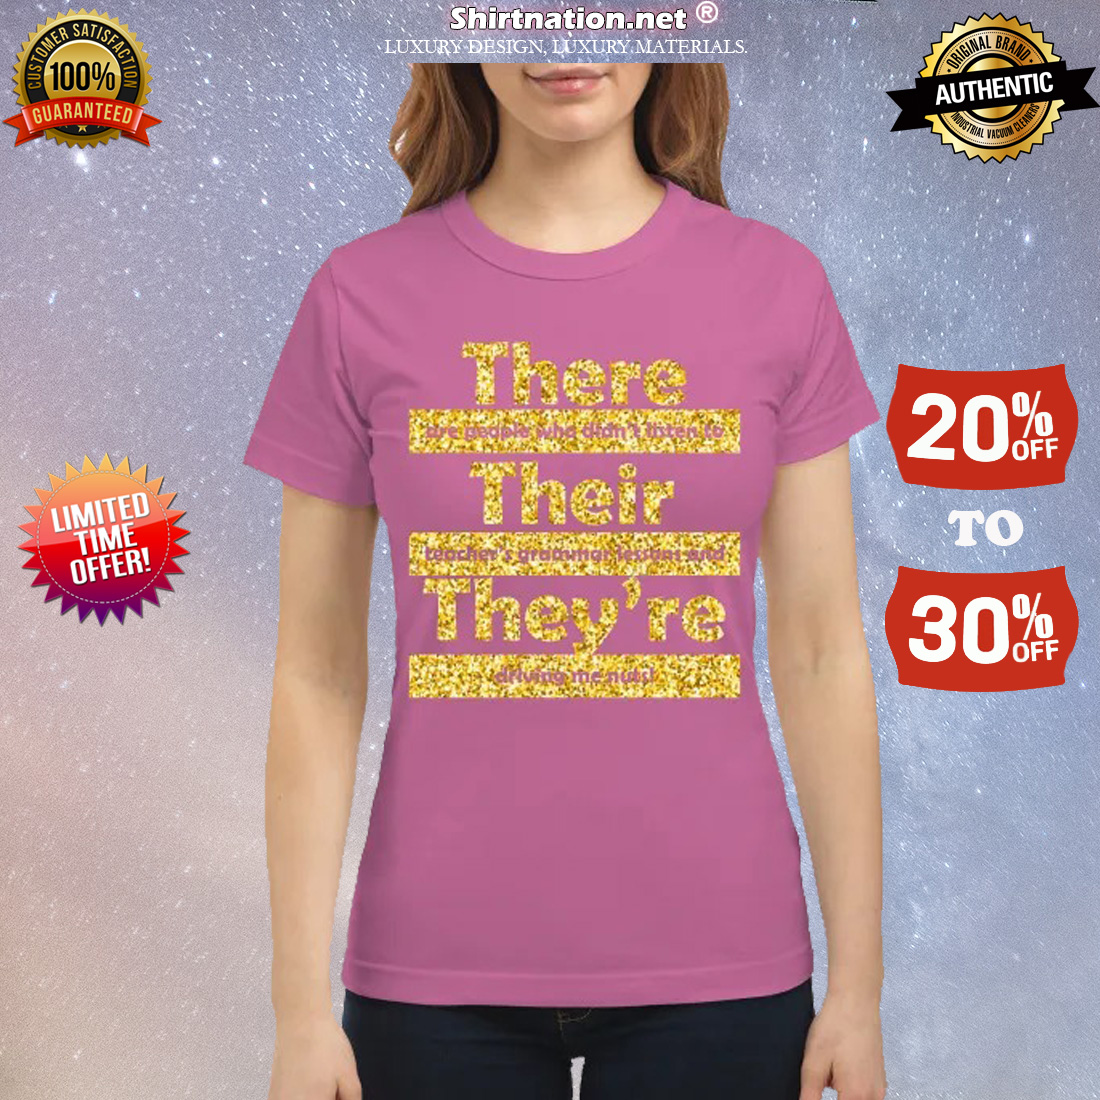 They are people who didn't listen to their teacher's grammar lessons and they're driving me nuts classic shirt